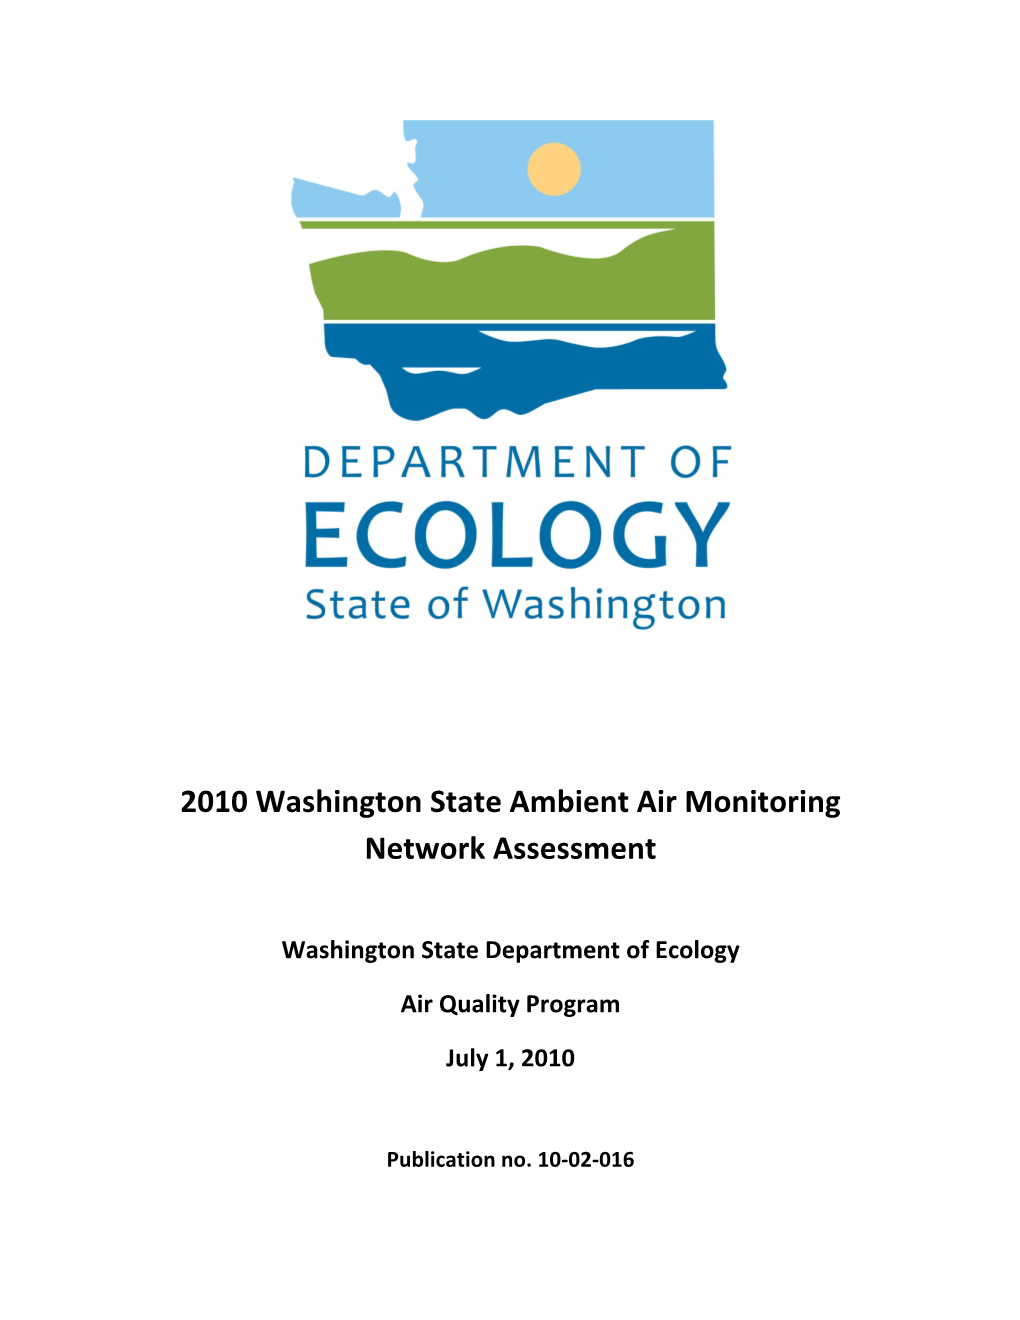 2010 Washington State Ambient Air Monitoring Network Assessment